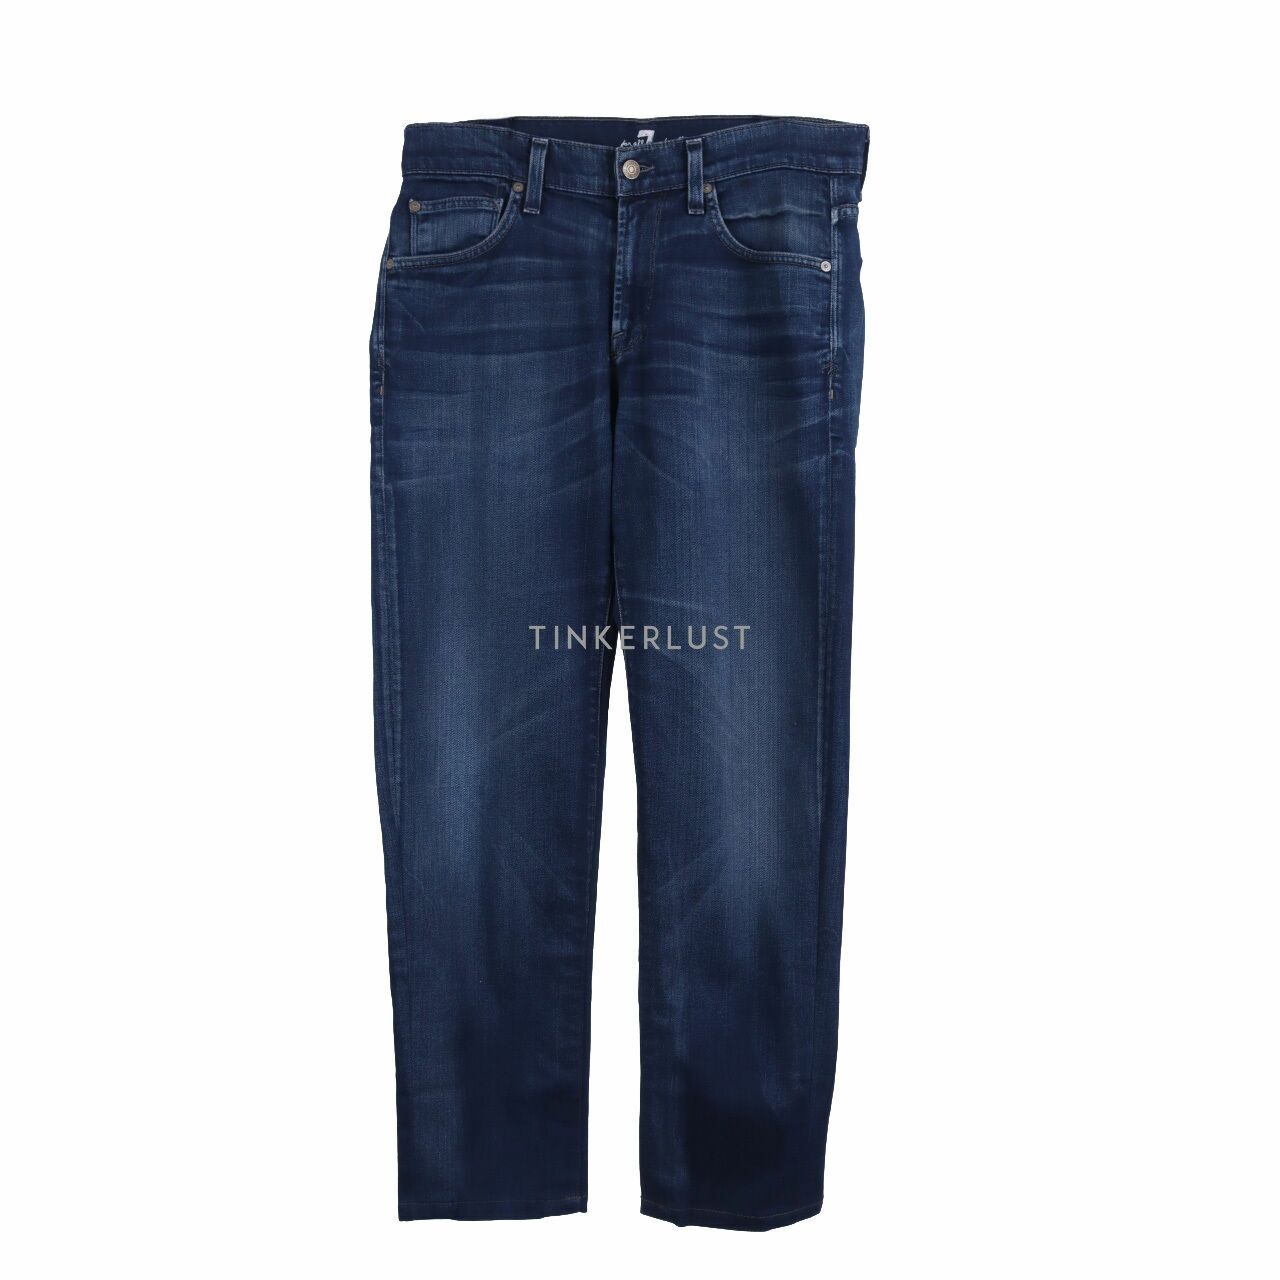 7 For All Mankind Denim Long Pants 